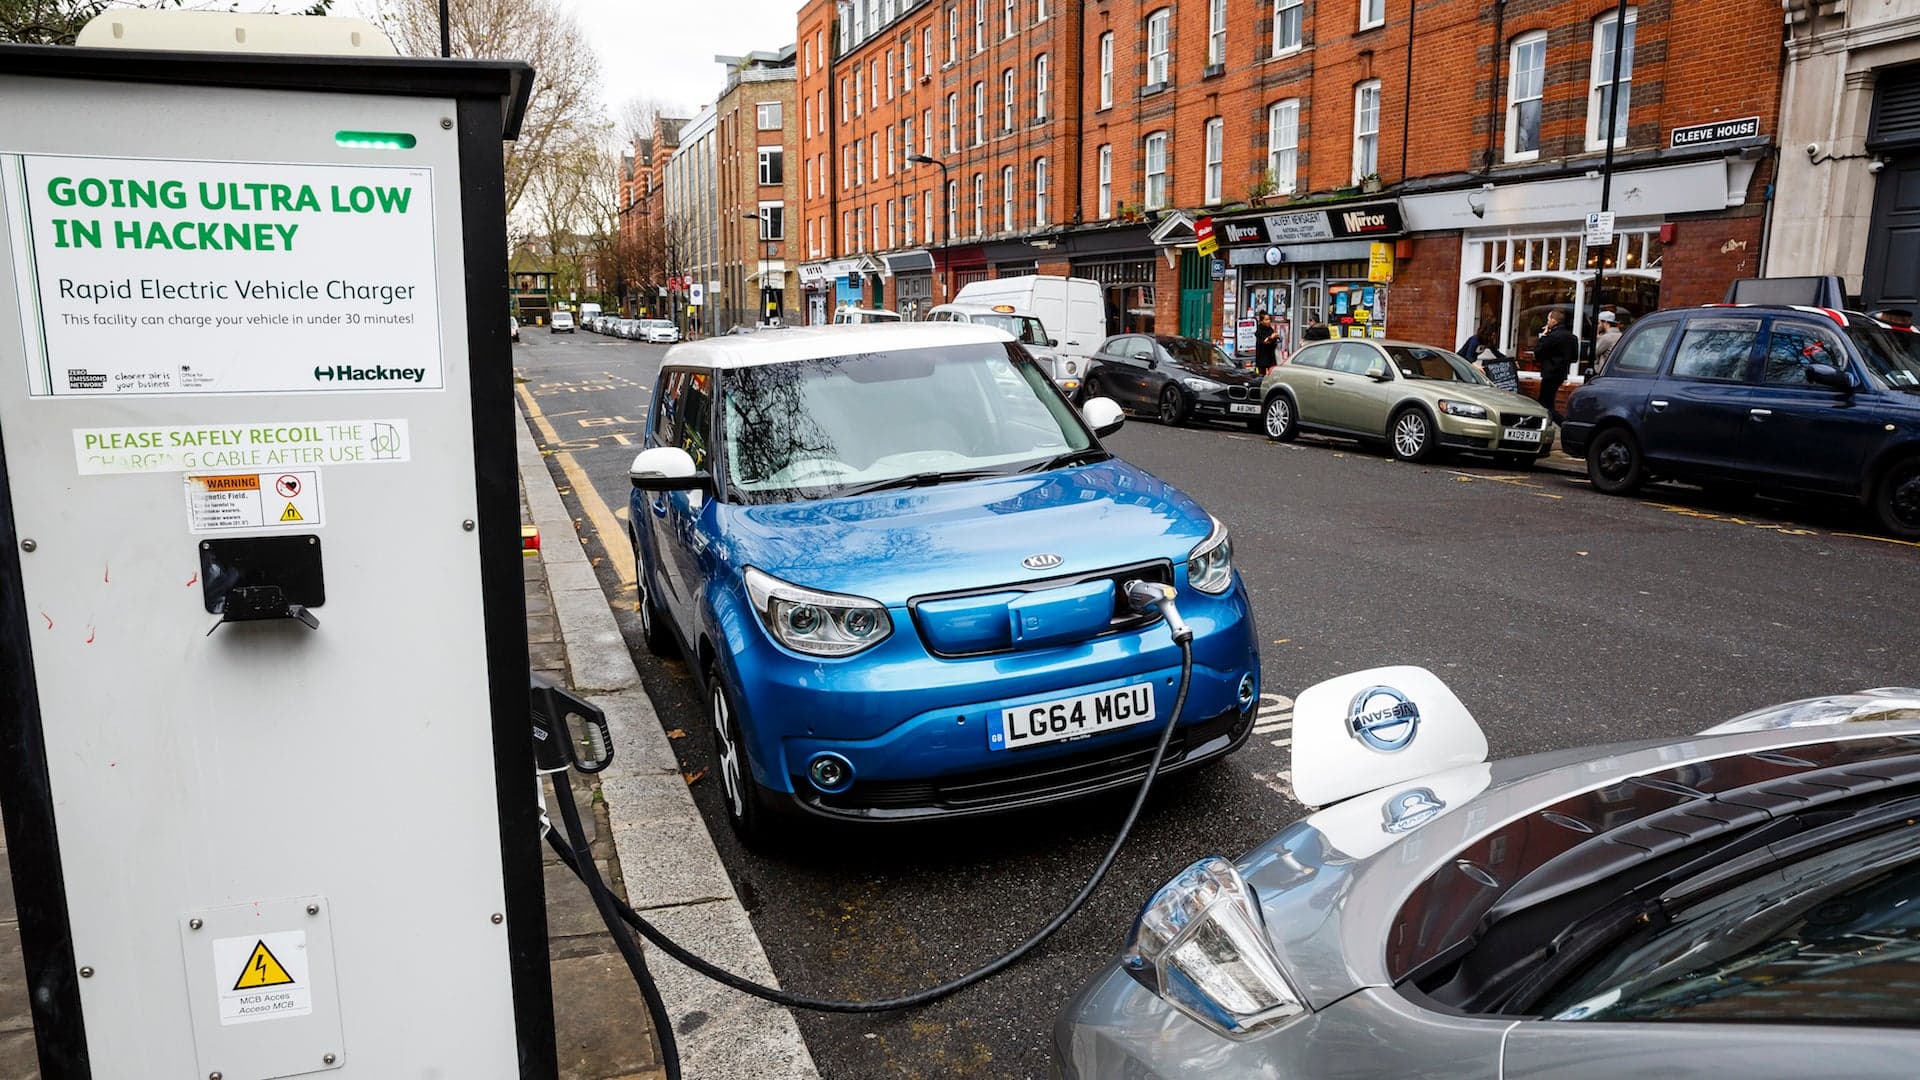 Paris to Ban Gas-Powered Vehicles a Decade Ahead of Schedule